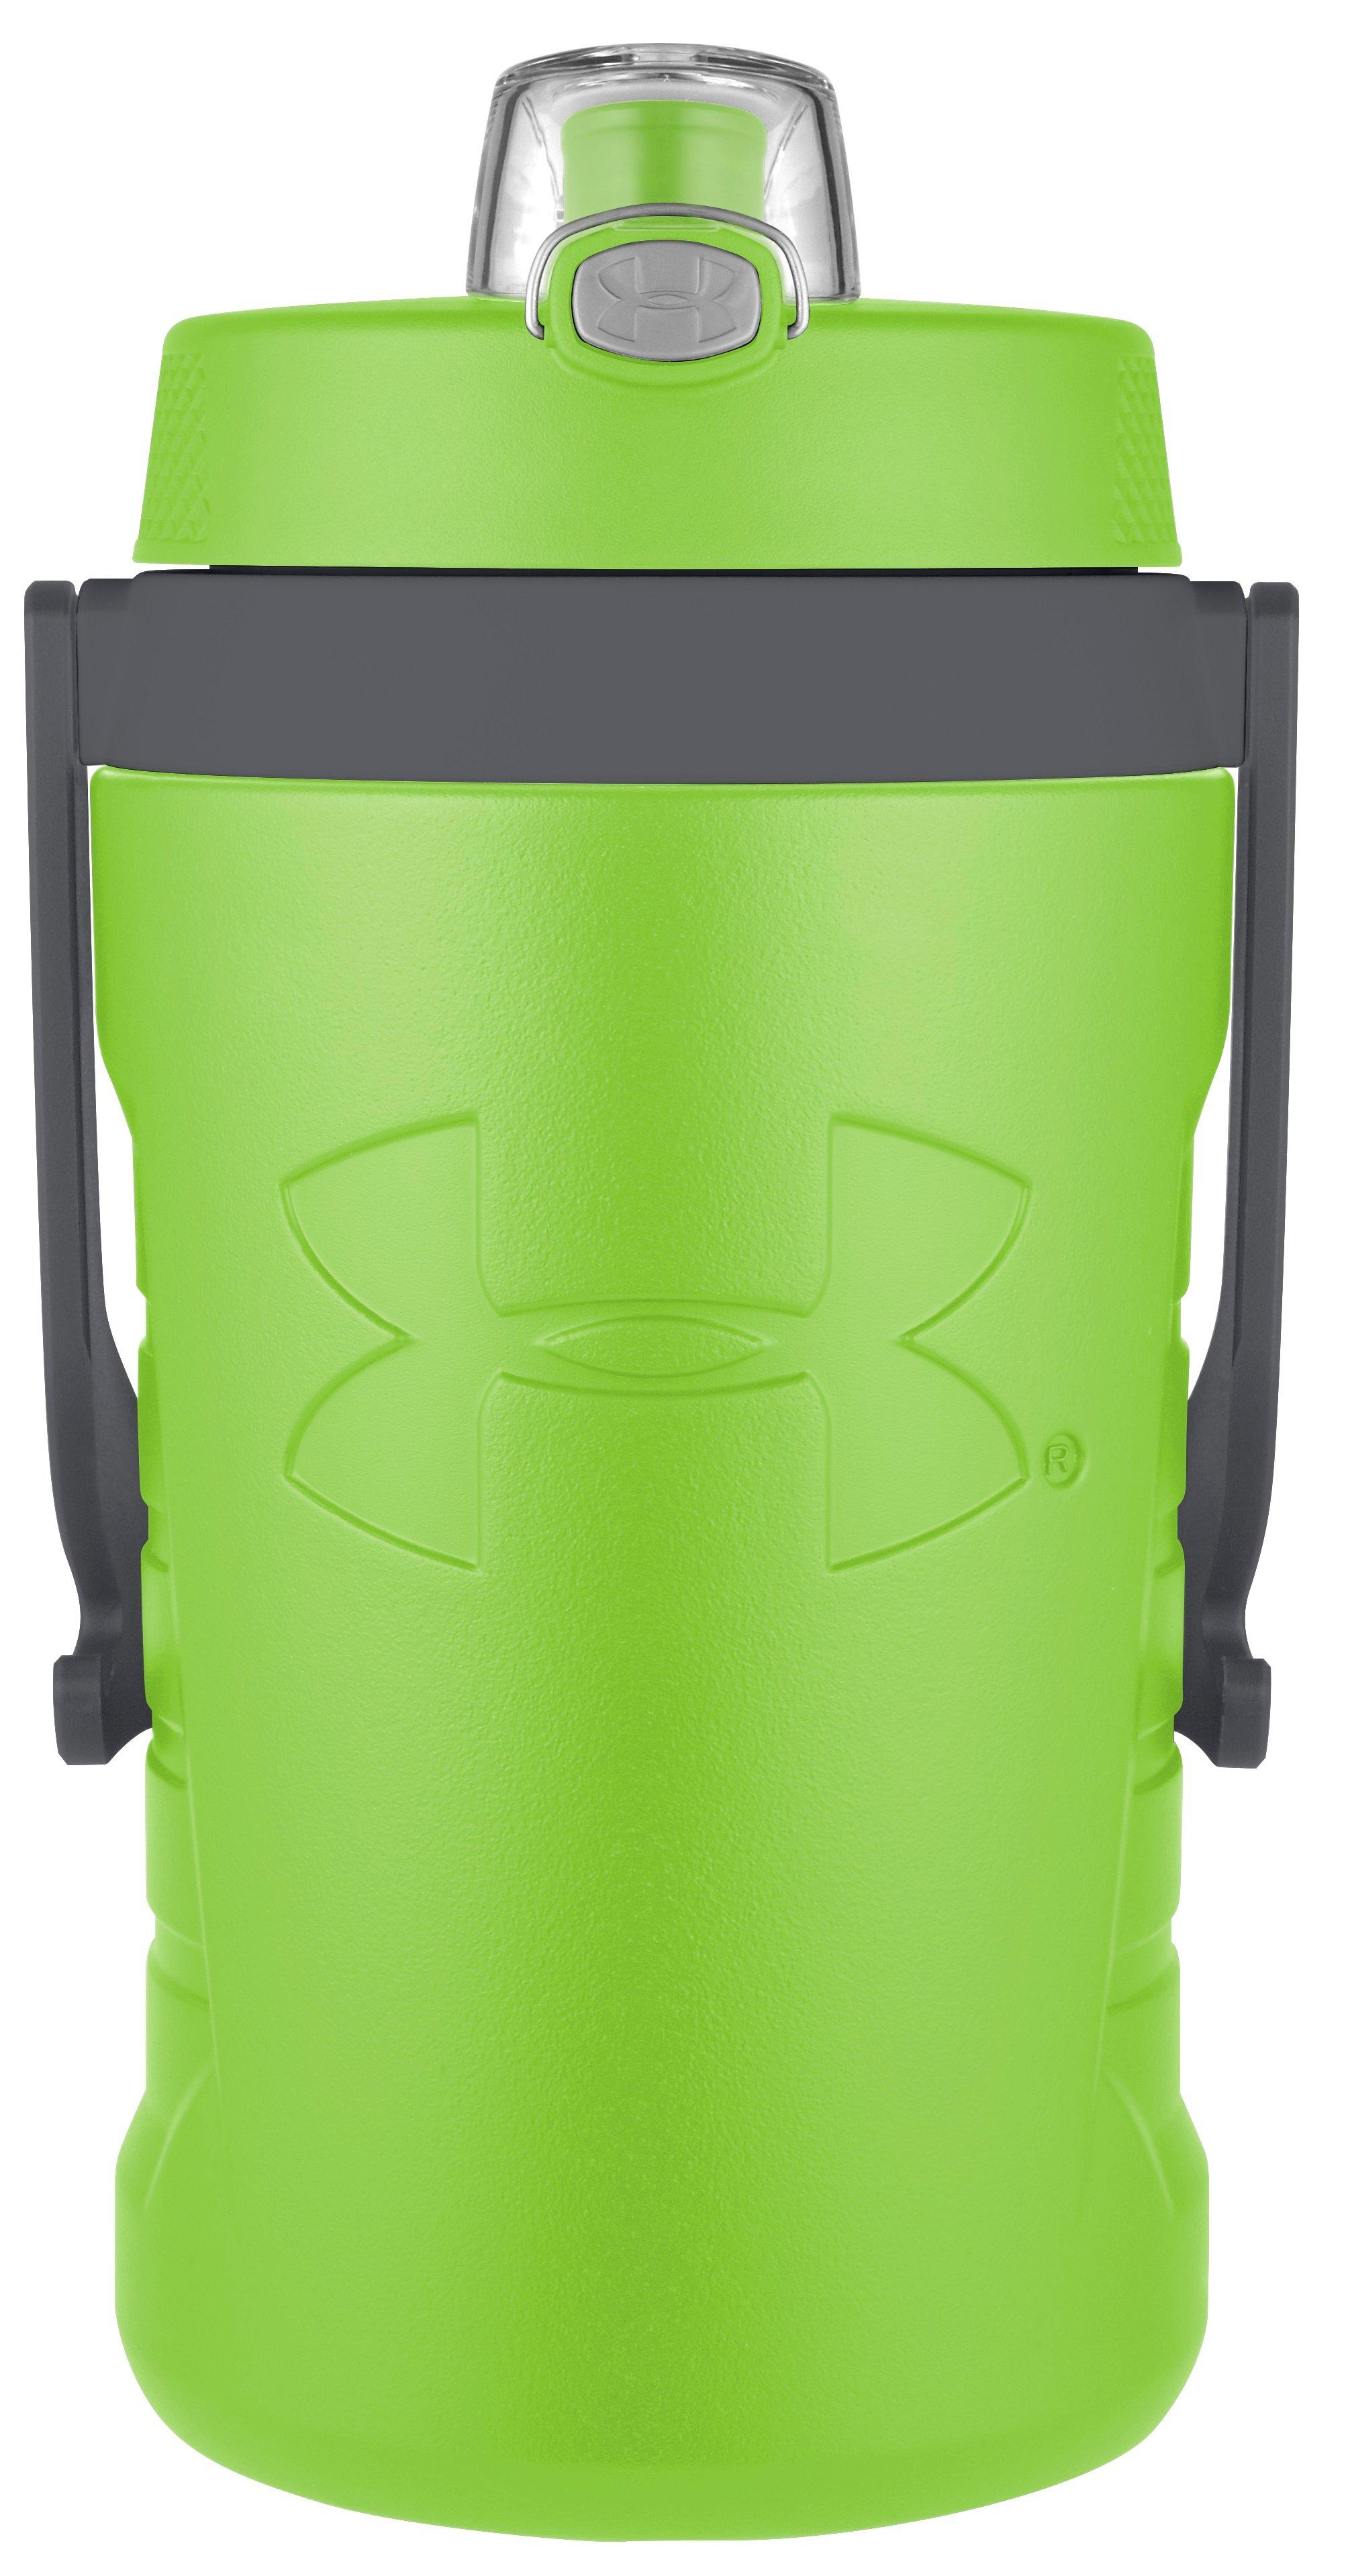 under armor thermos water bottle